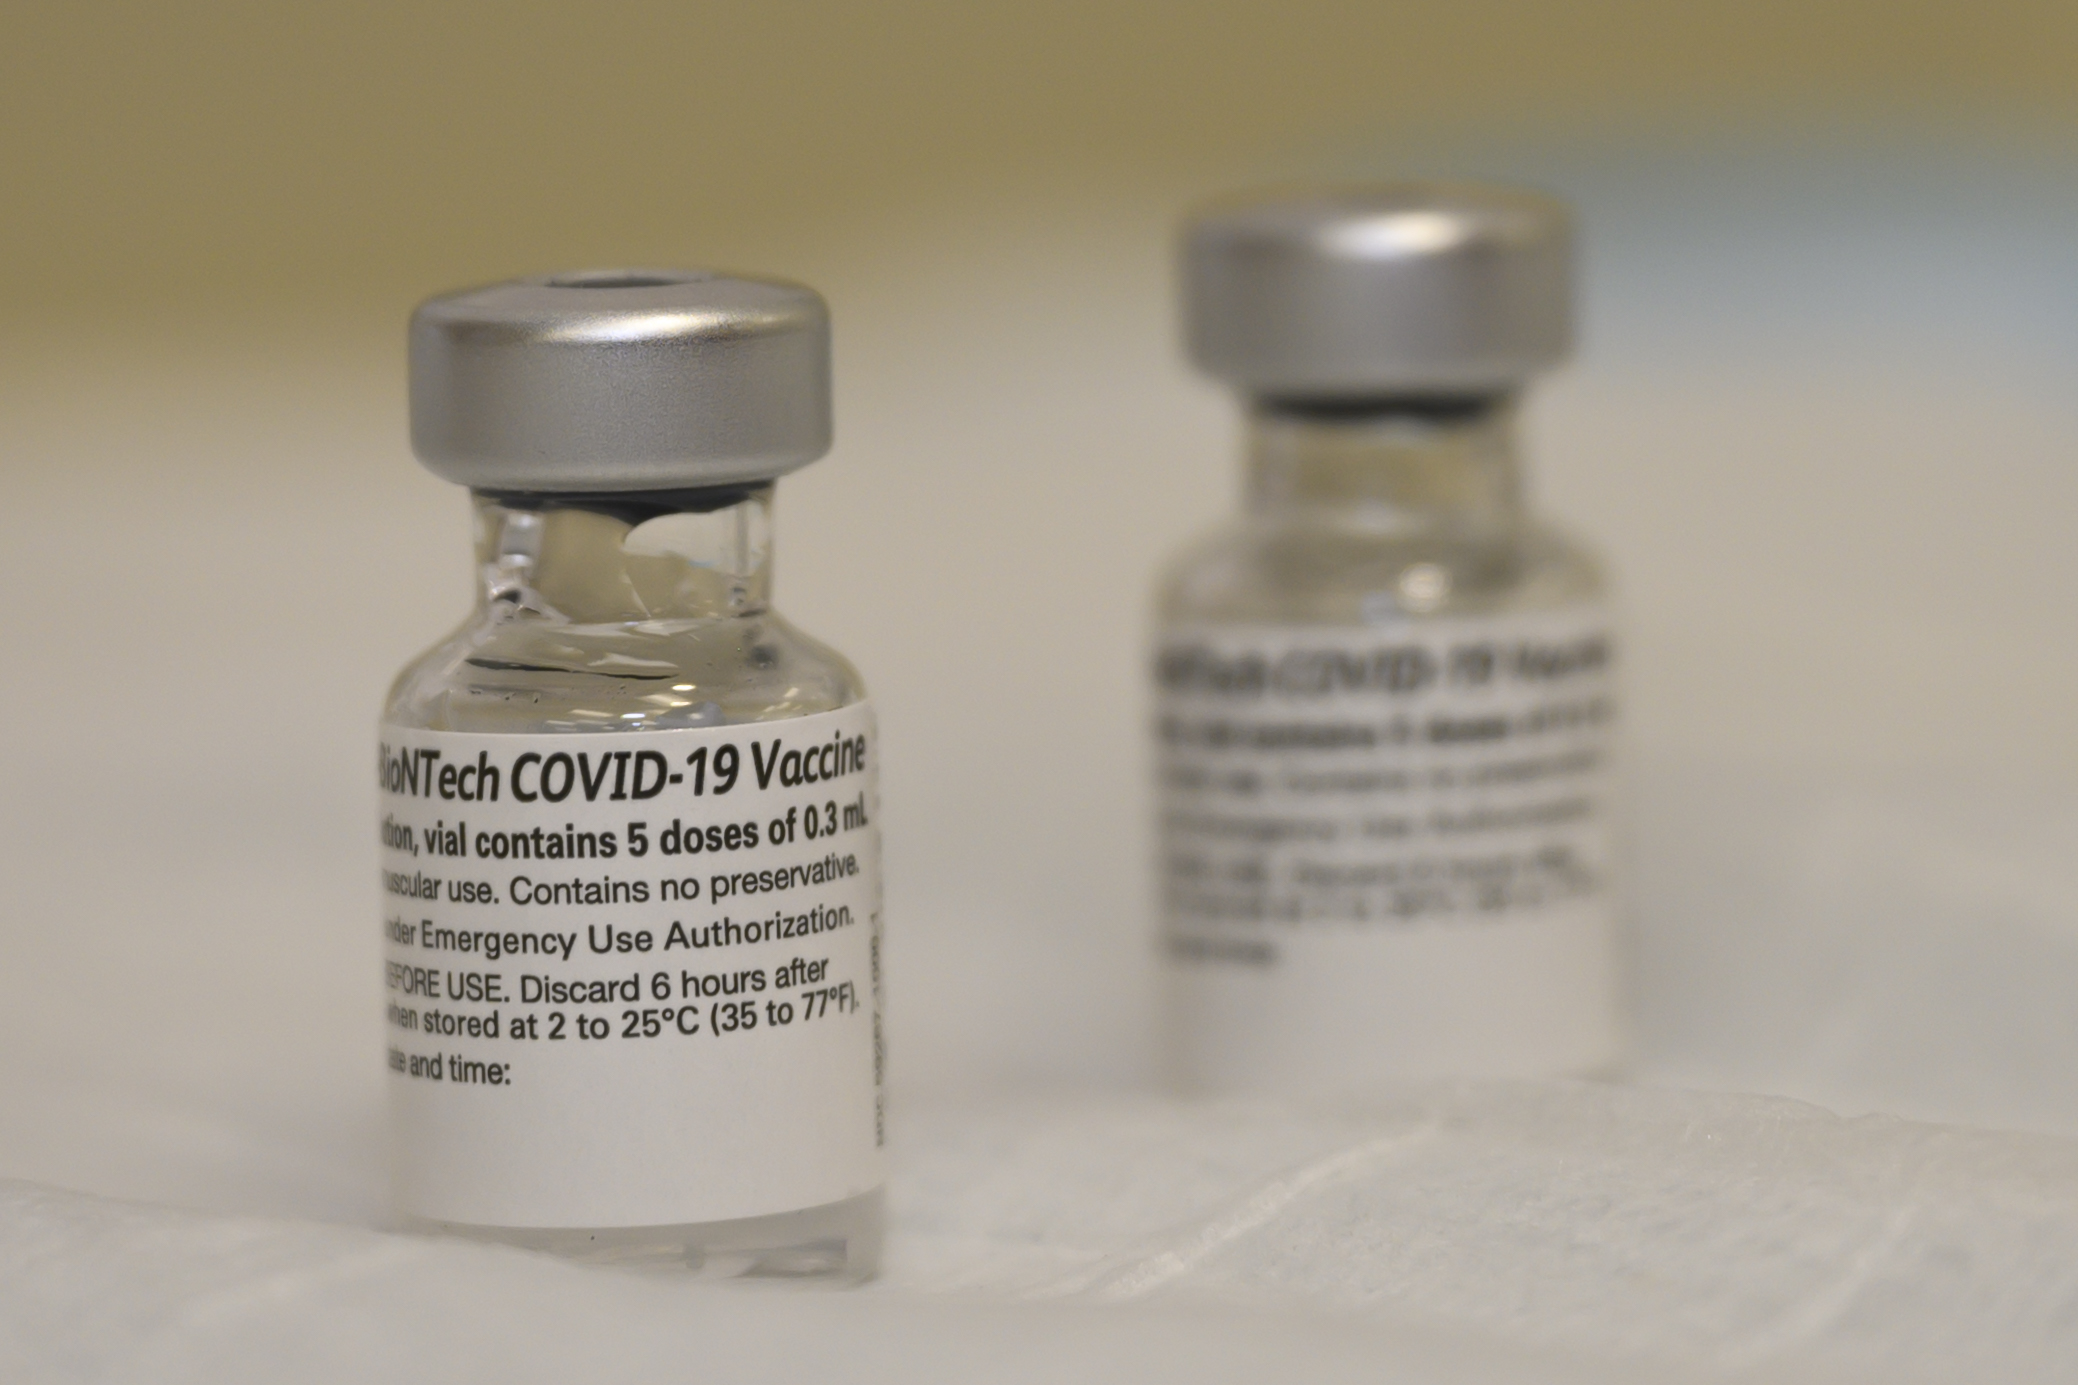 Photo showing two glass containers of COVID-19 vaccine